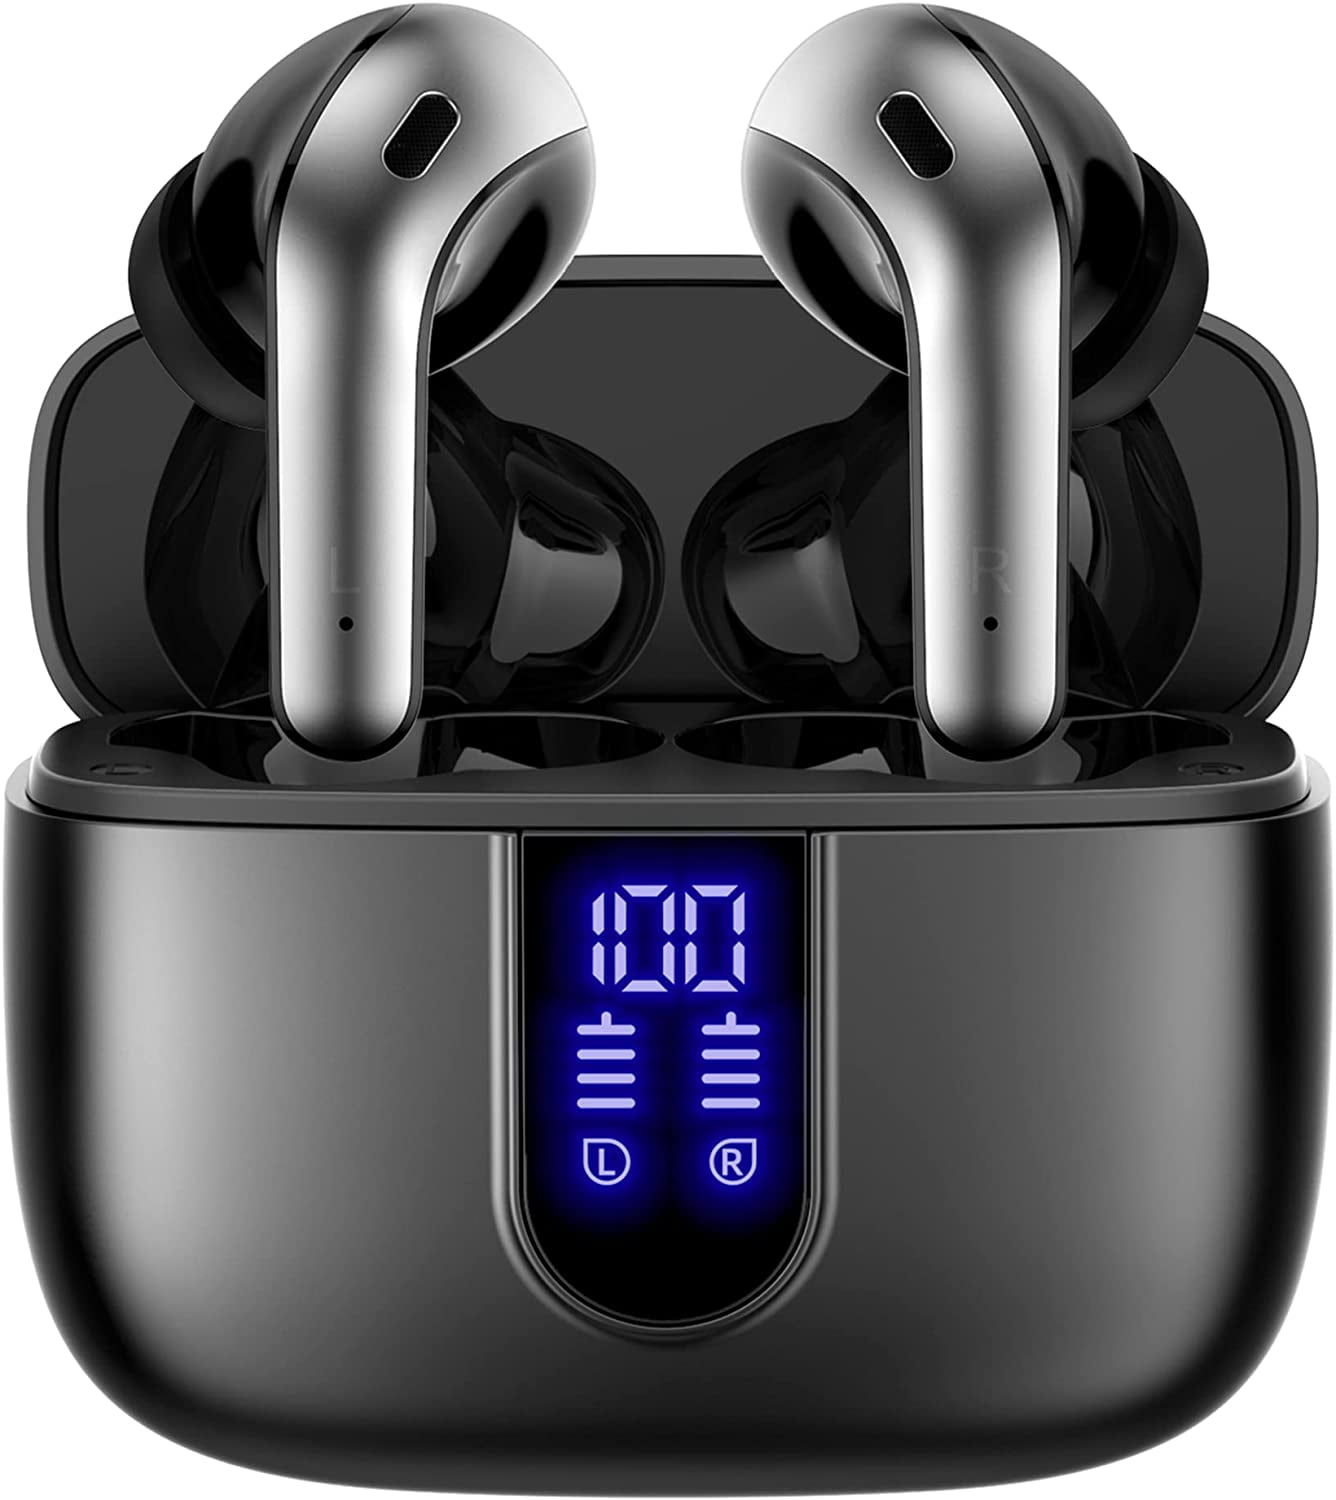 in-Ear Noise Cancelling Stereo Headset 128 for All Smartphones Anti-Sweat Earplugs Gym Running Wireless Bluetooth Earbuds with Portable Charging Case Long Battery Life 